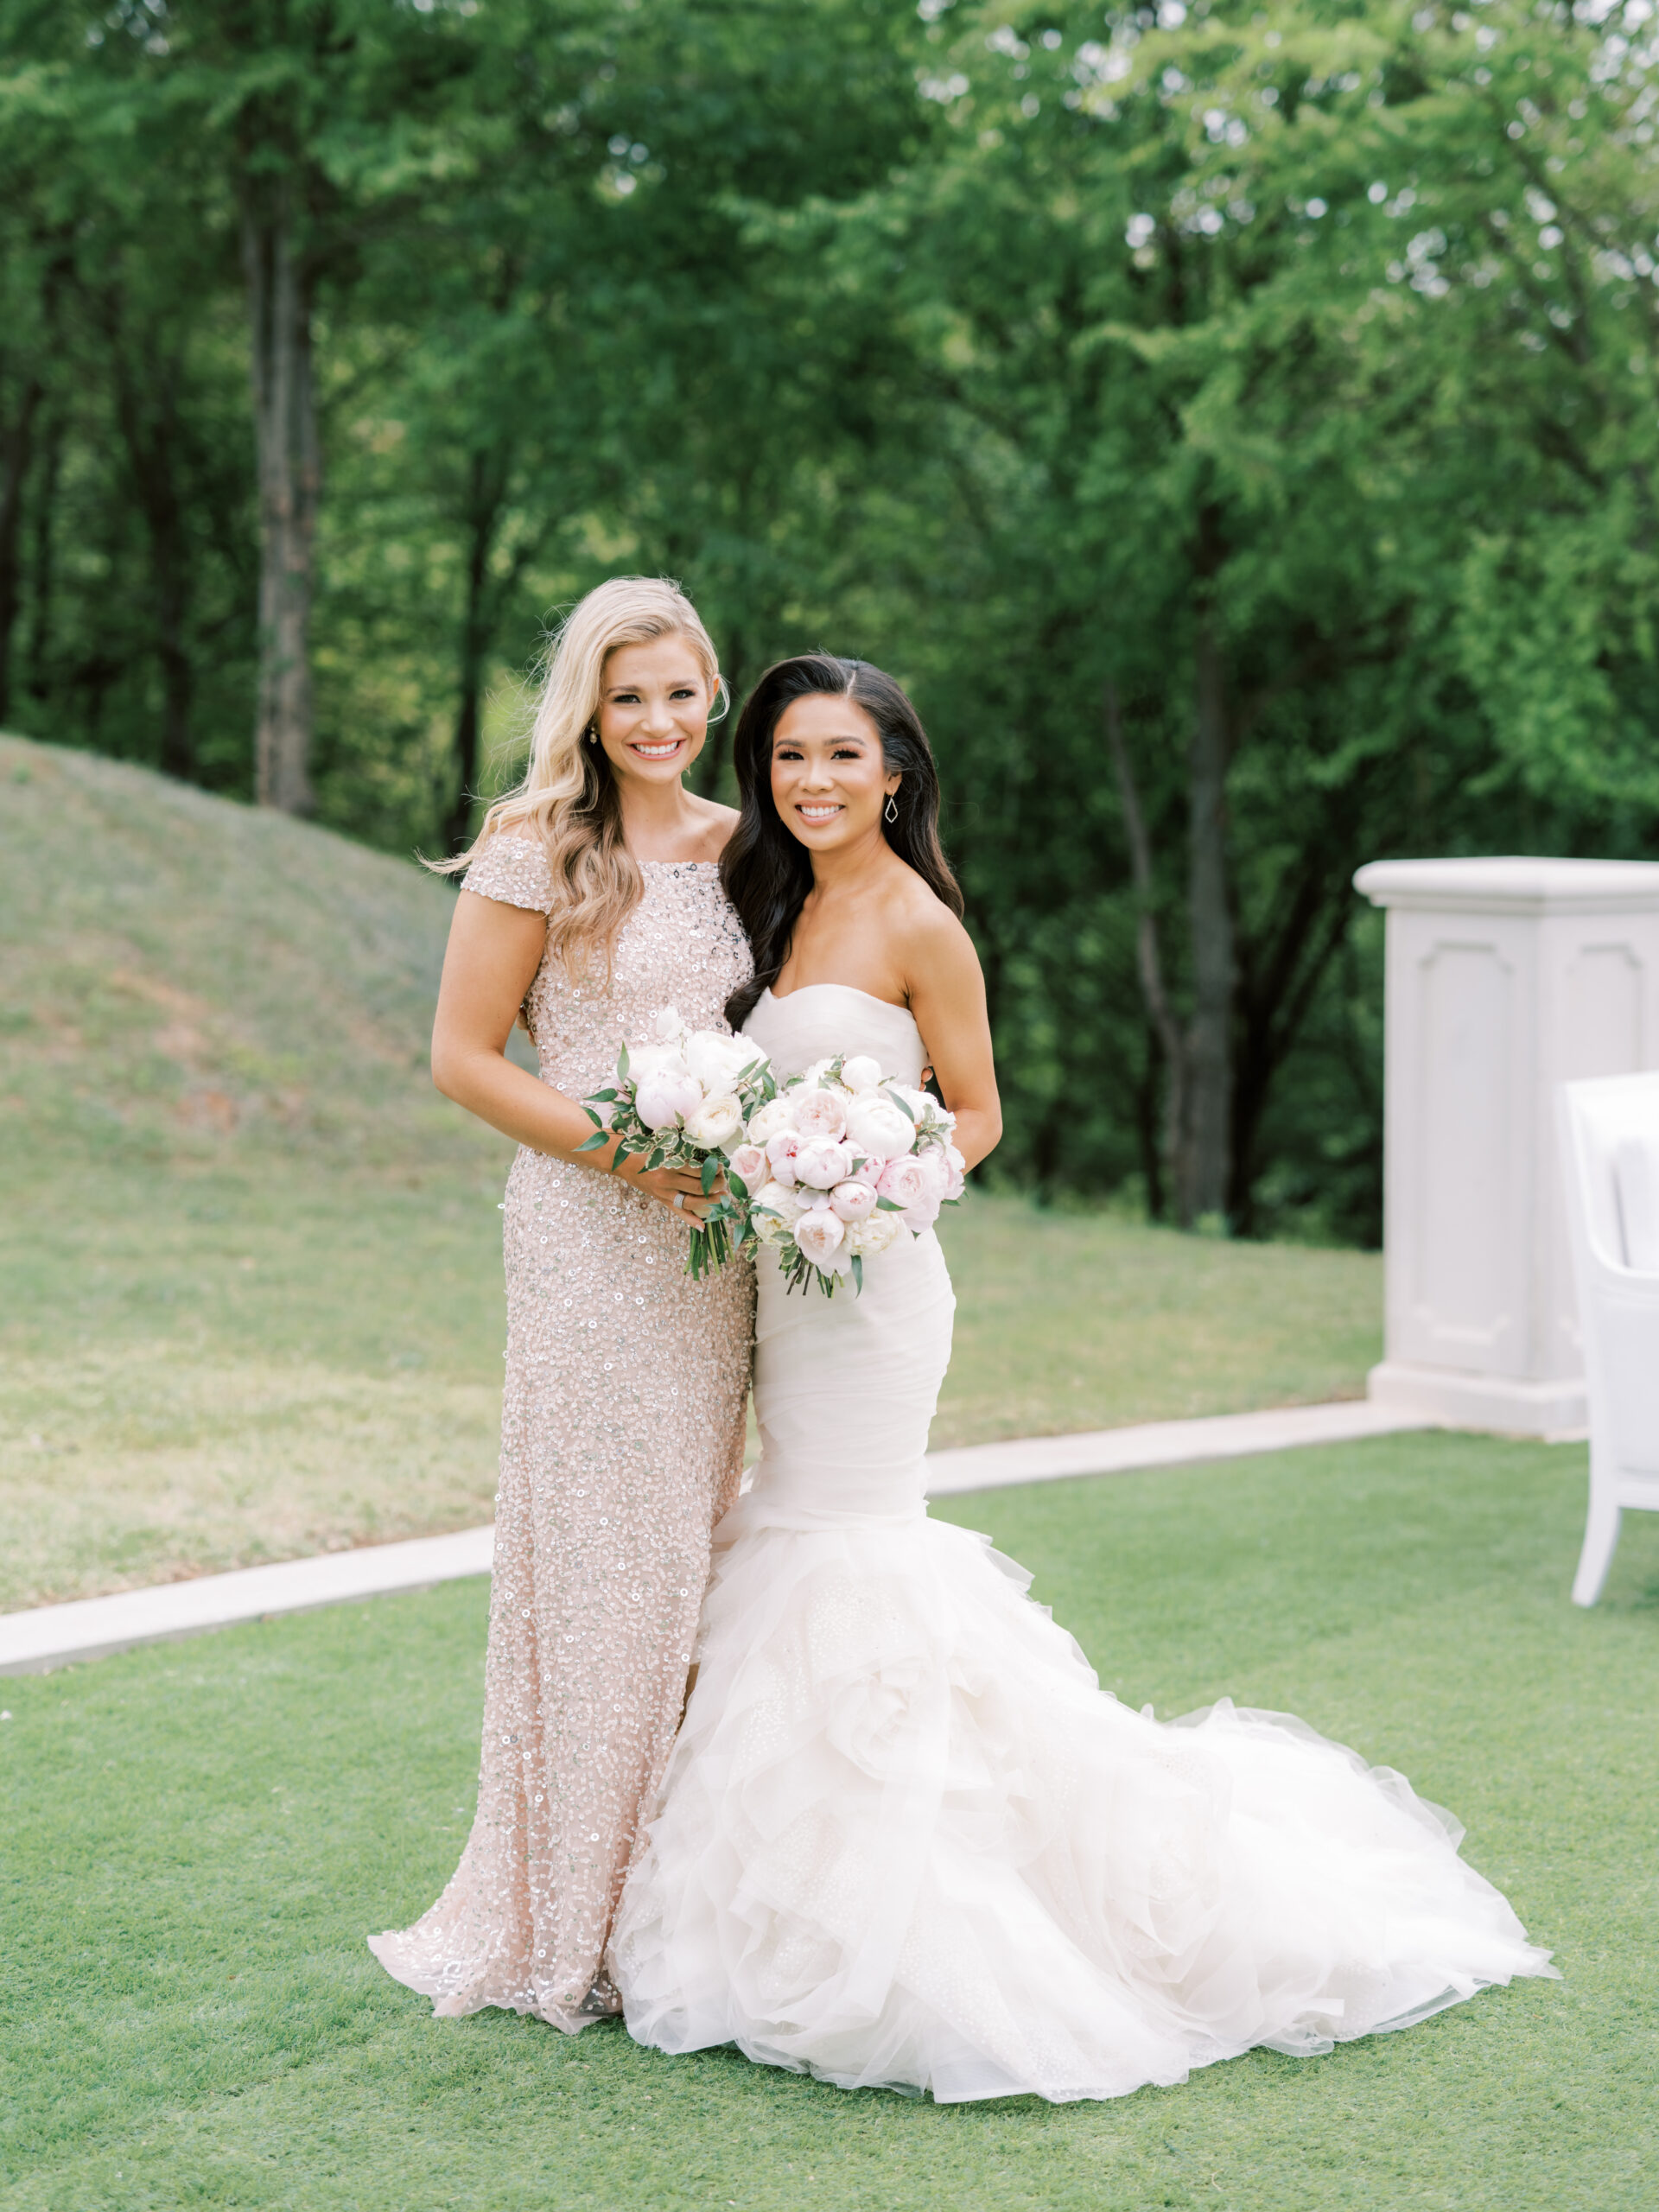 Hoang-Kim wearing a Vera Wang Gemma mermaid gown with her bridesmaid, Danielle Doty Fitzgerald wearing an Adriana Papell off-the-shoulder gown and olive + piper earrings